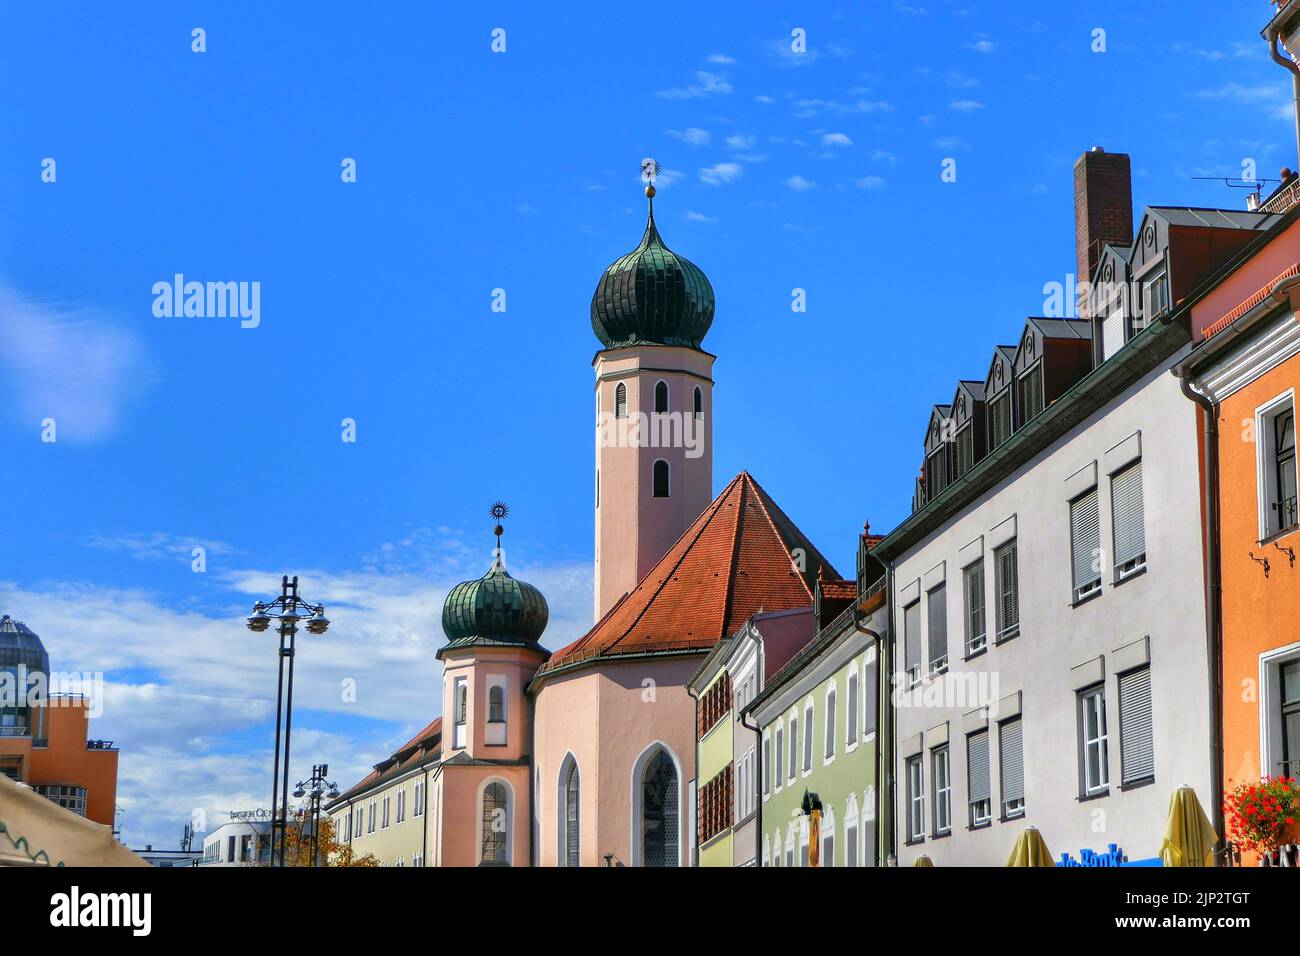 Picture shows city and street photography while walking through Straubing in Bavaria, Germany Stock Photo